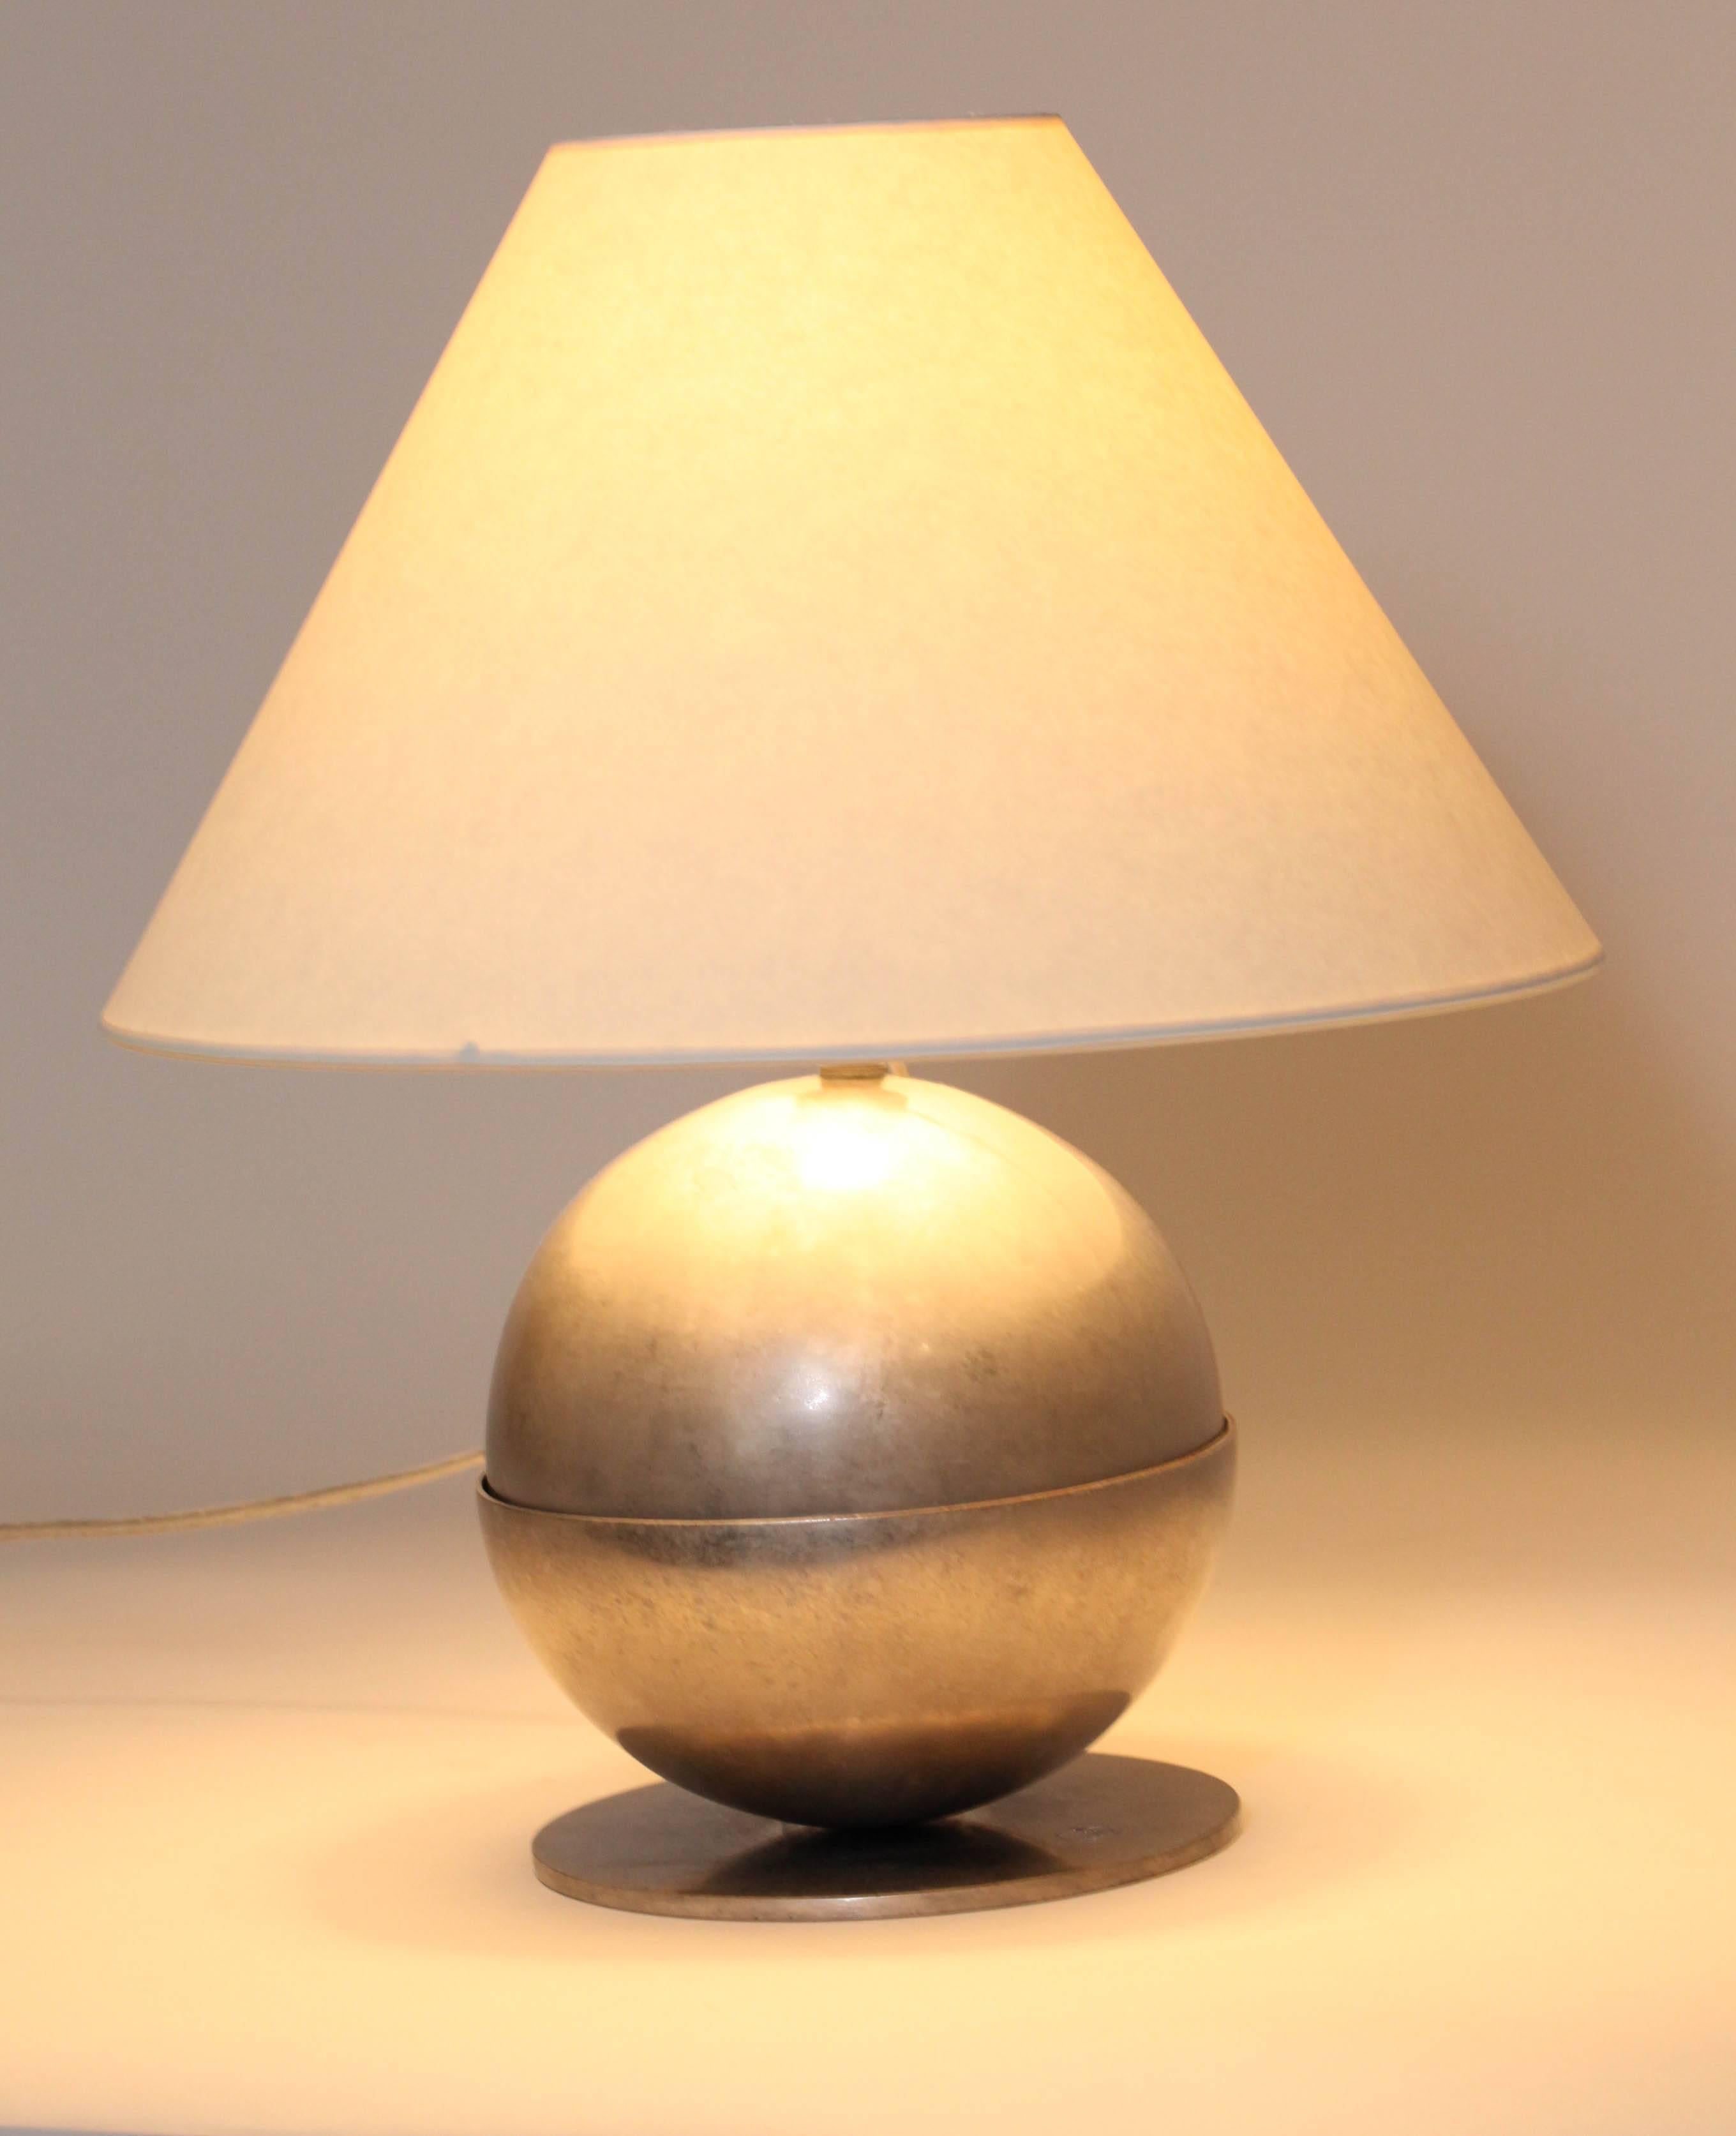 With adjustable nickeled brass sphere in base and on circular foot; with shade.
With original French electrical components, but rewired to American standard. 
Impressed Boris Lacroix cachet. 
Good working condition.

Measures: Base: 5 ¾”